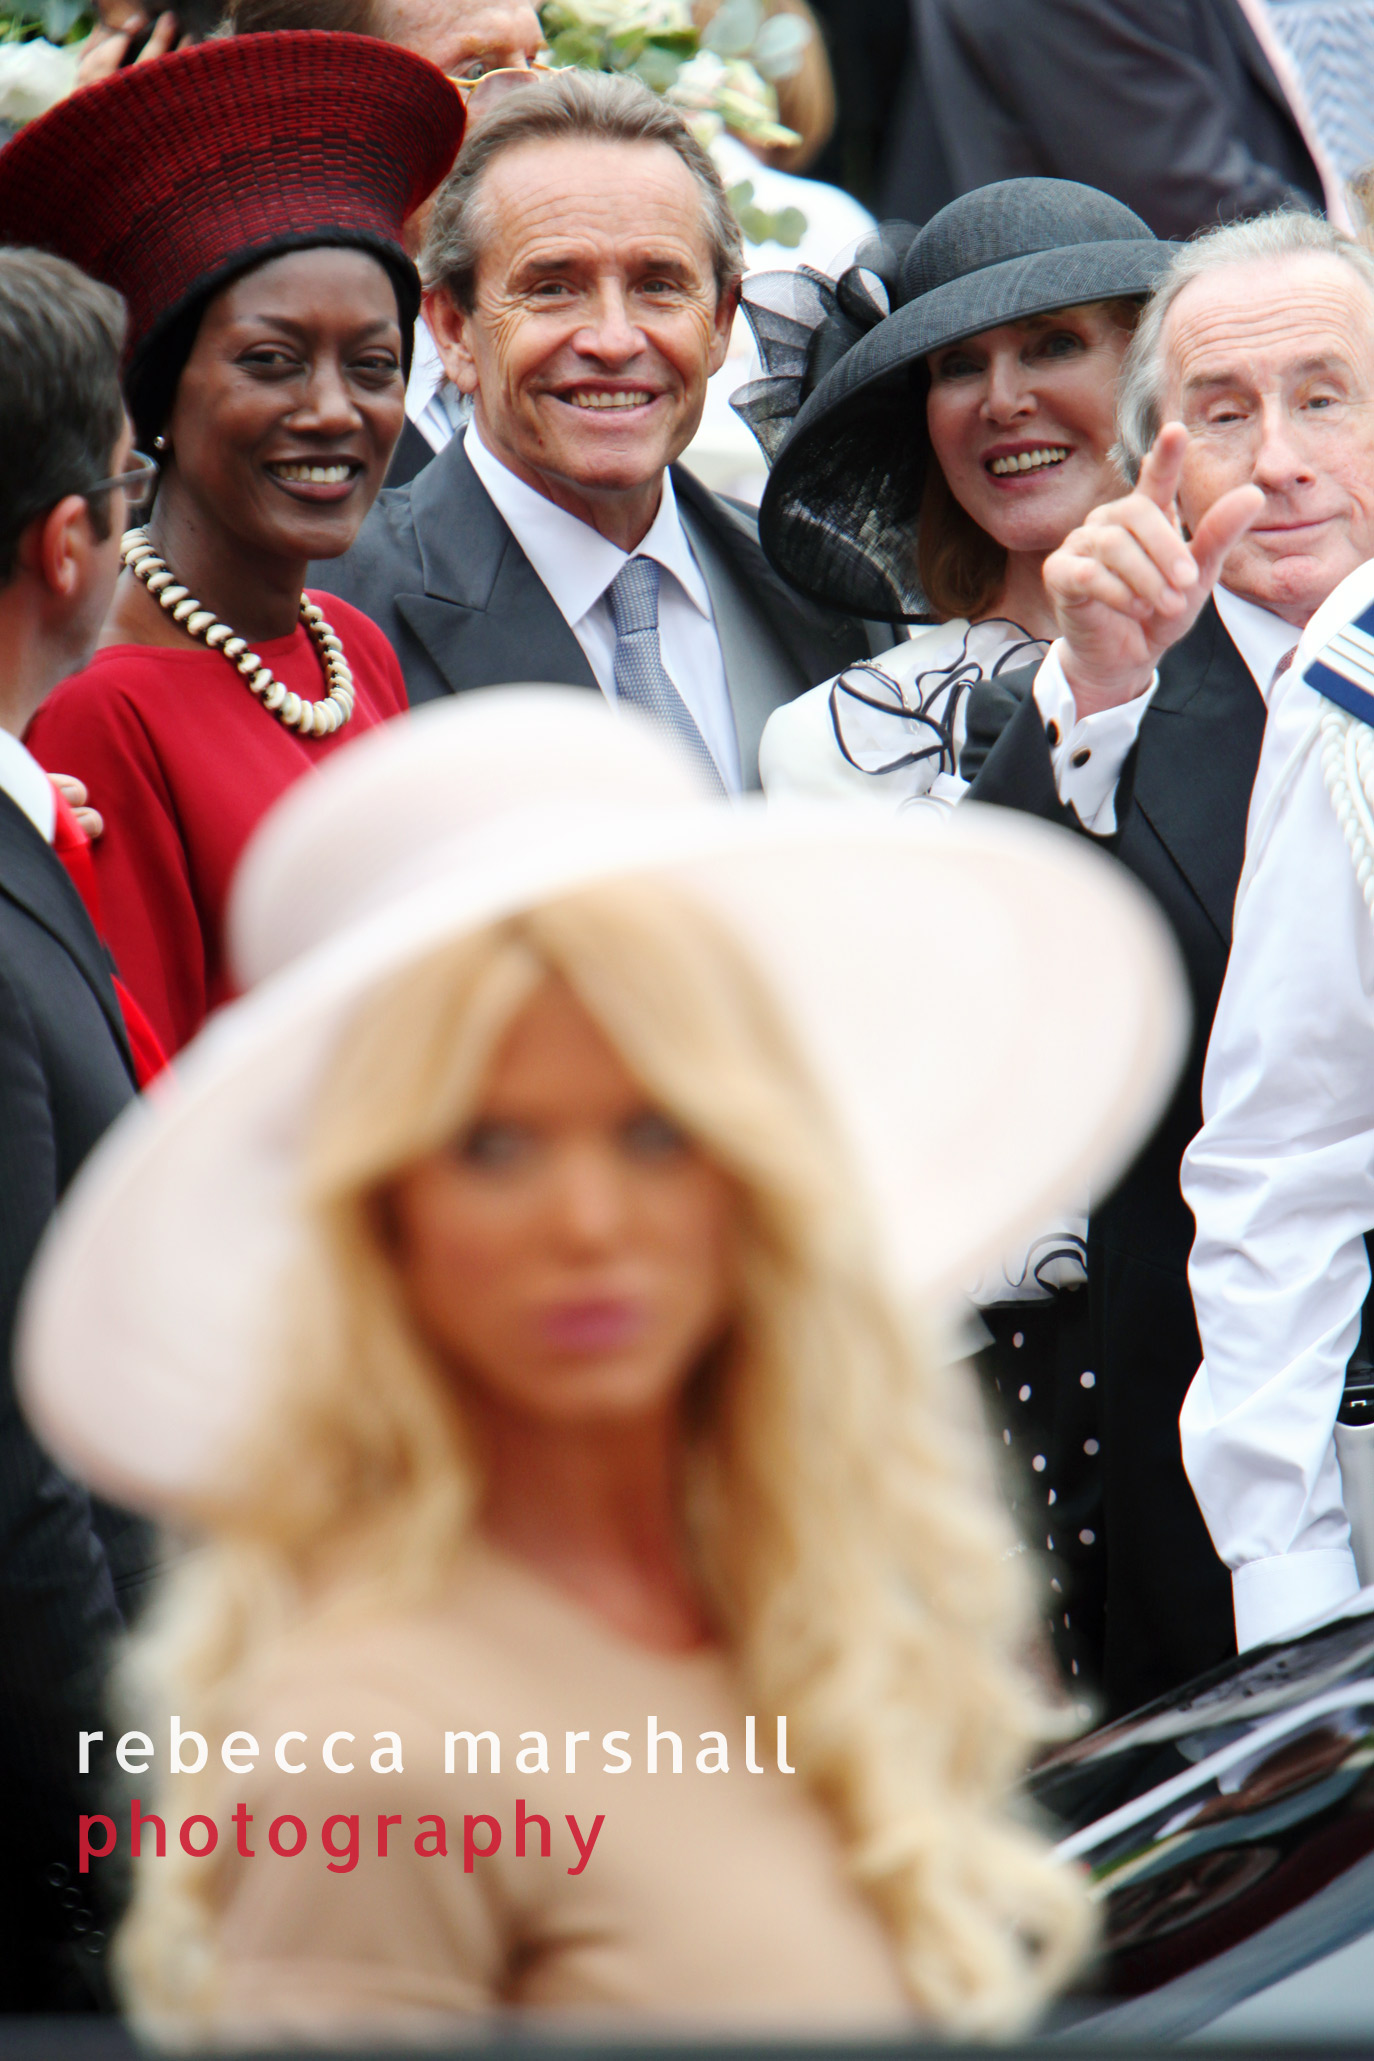 Formula One drivers Jacky Ickx and Jackie Stewart (Victoria Silvstedt in the foreground)